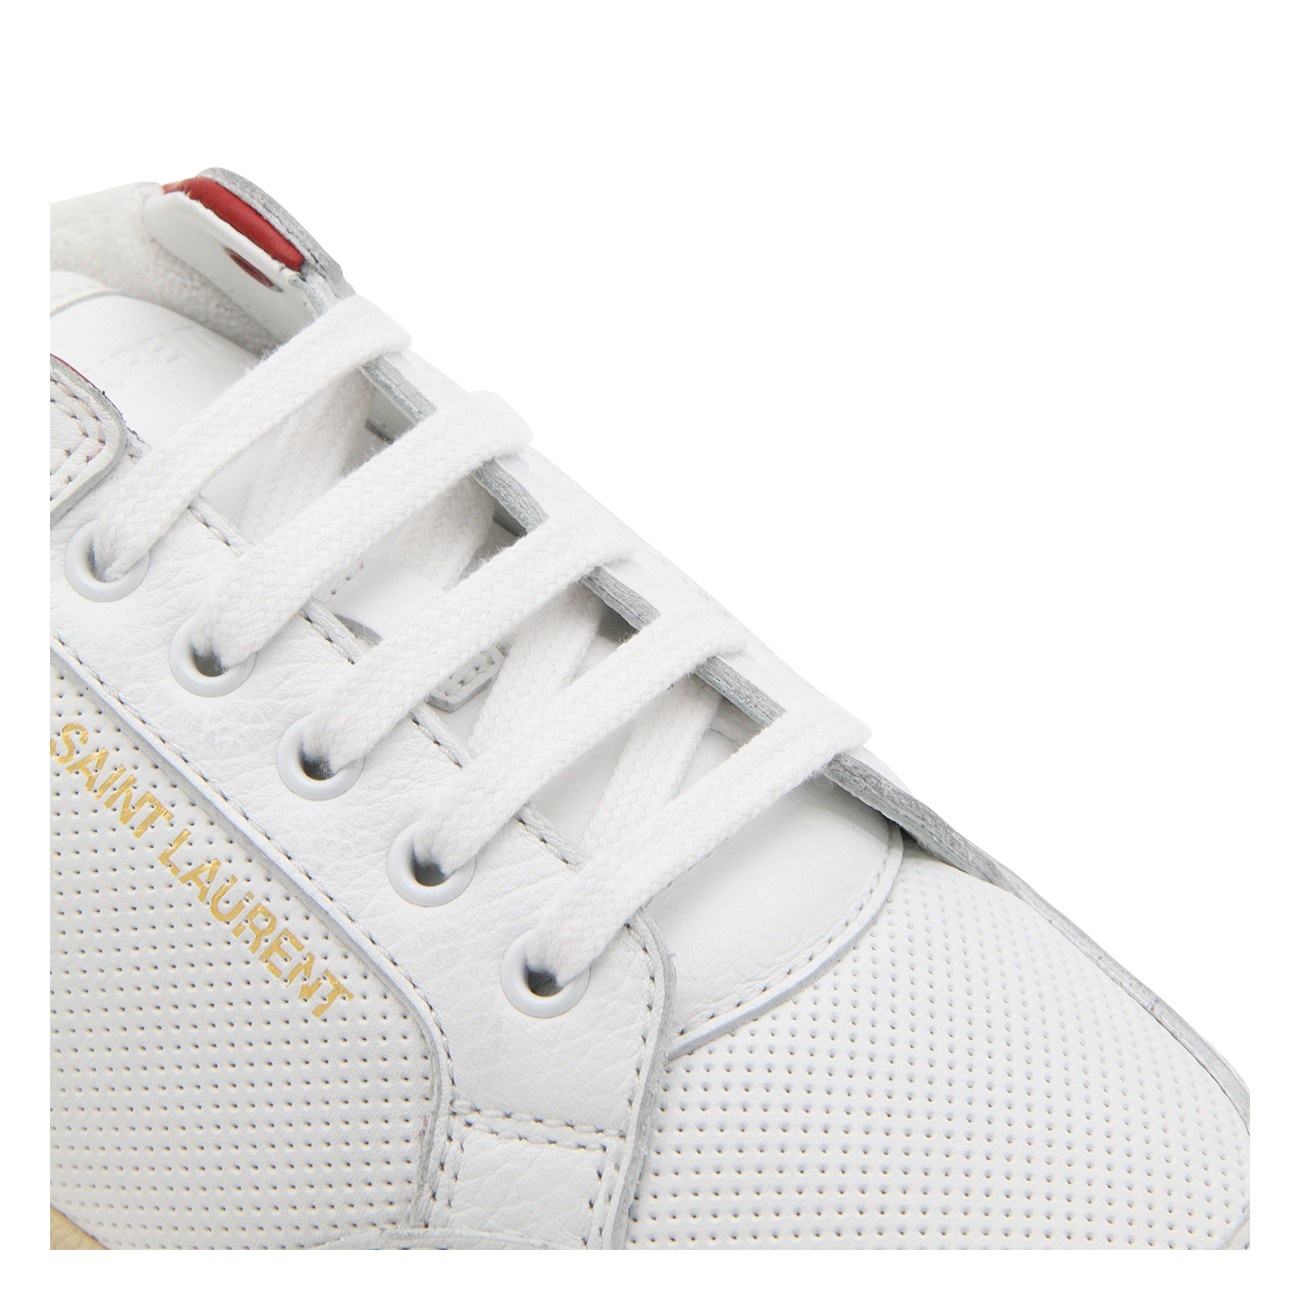 white and red leather sneakers - 4